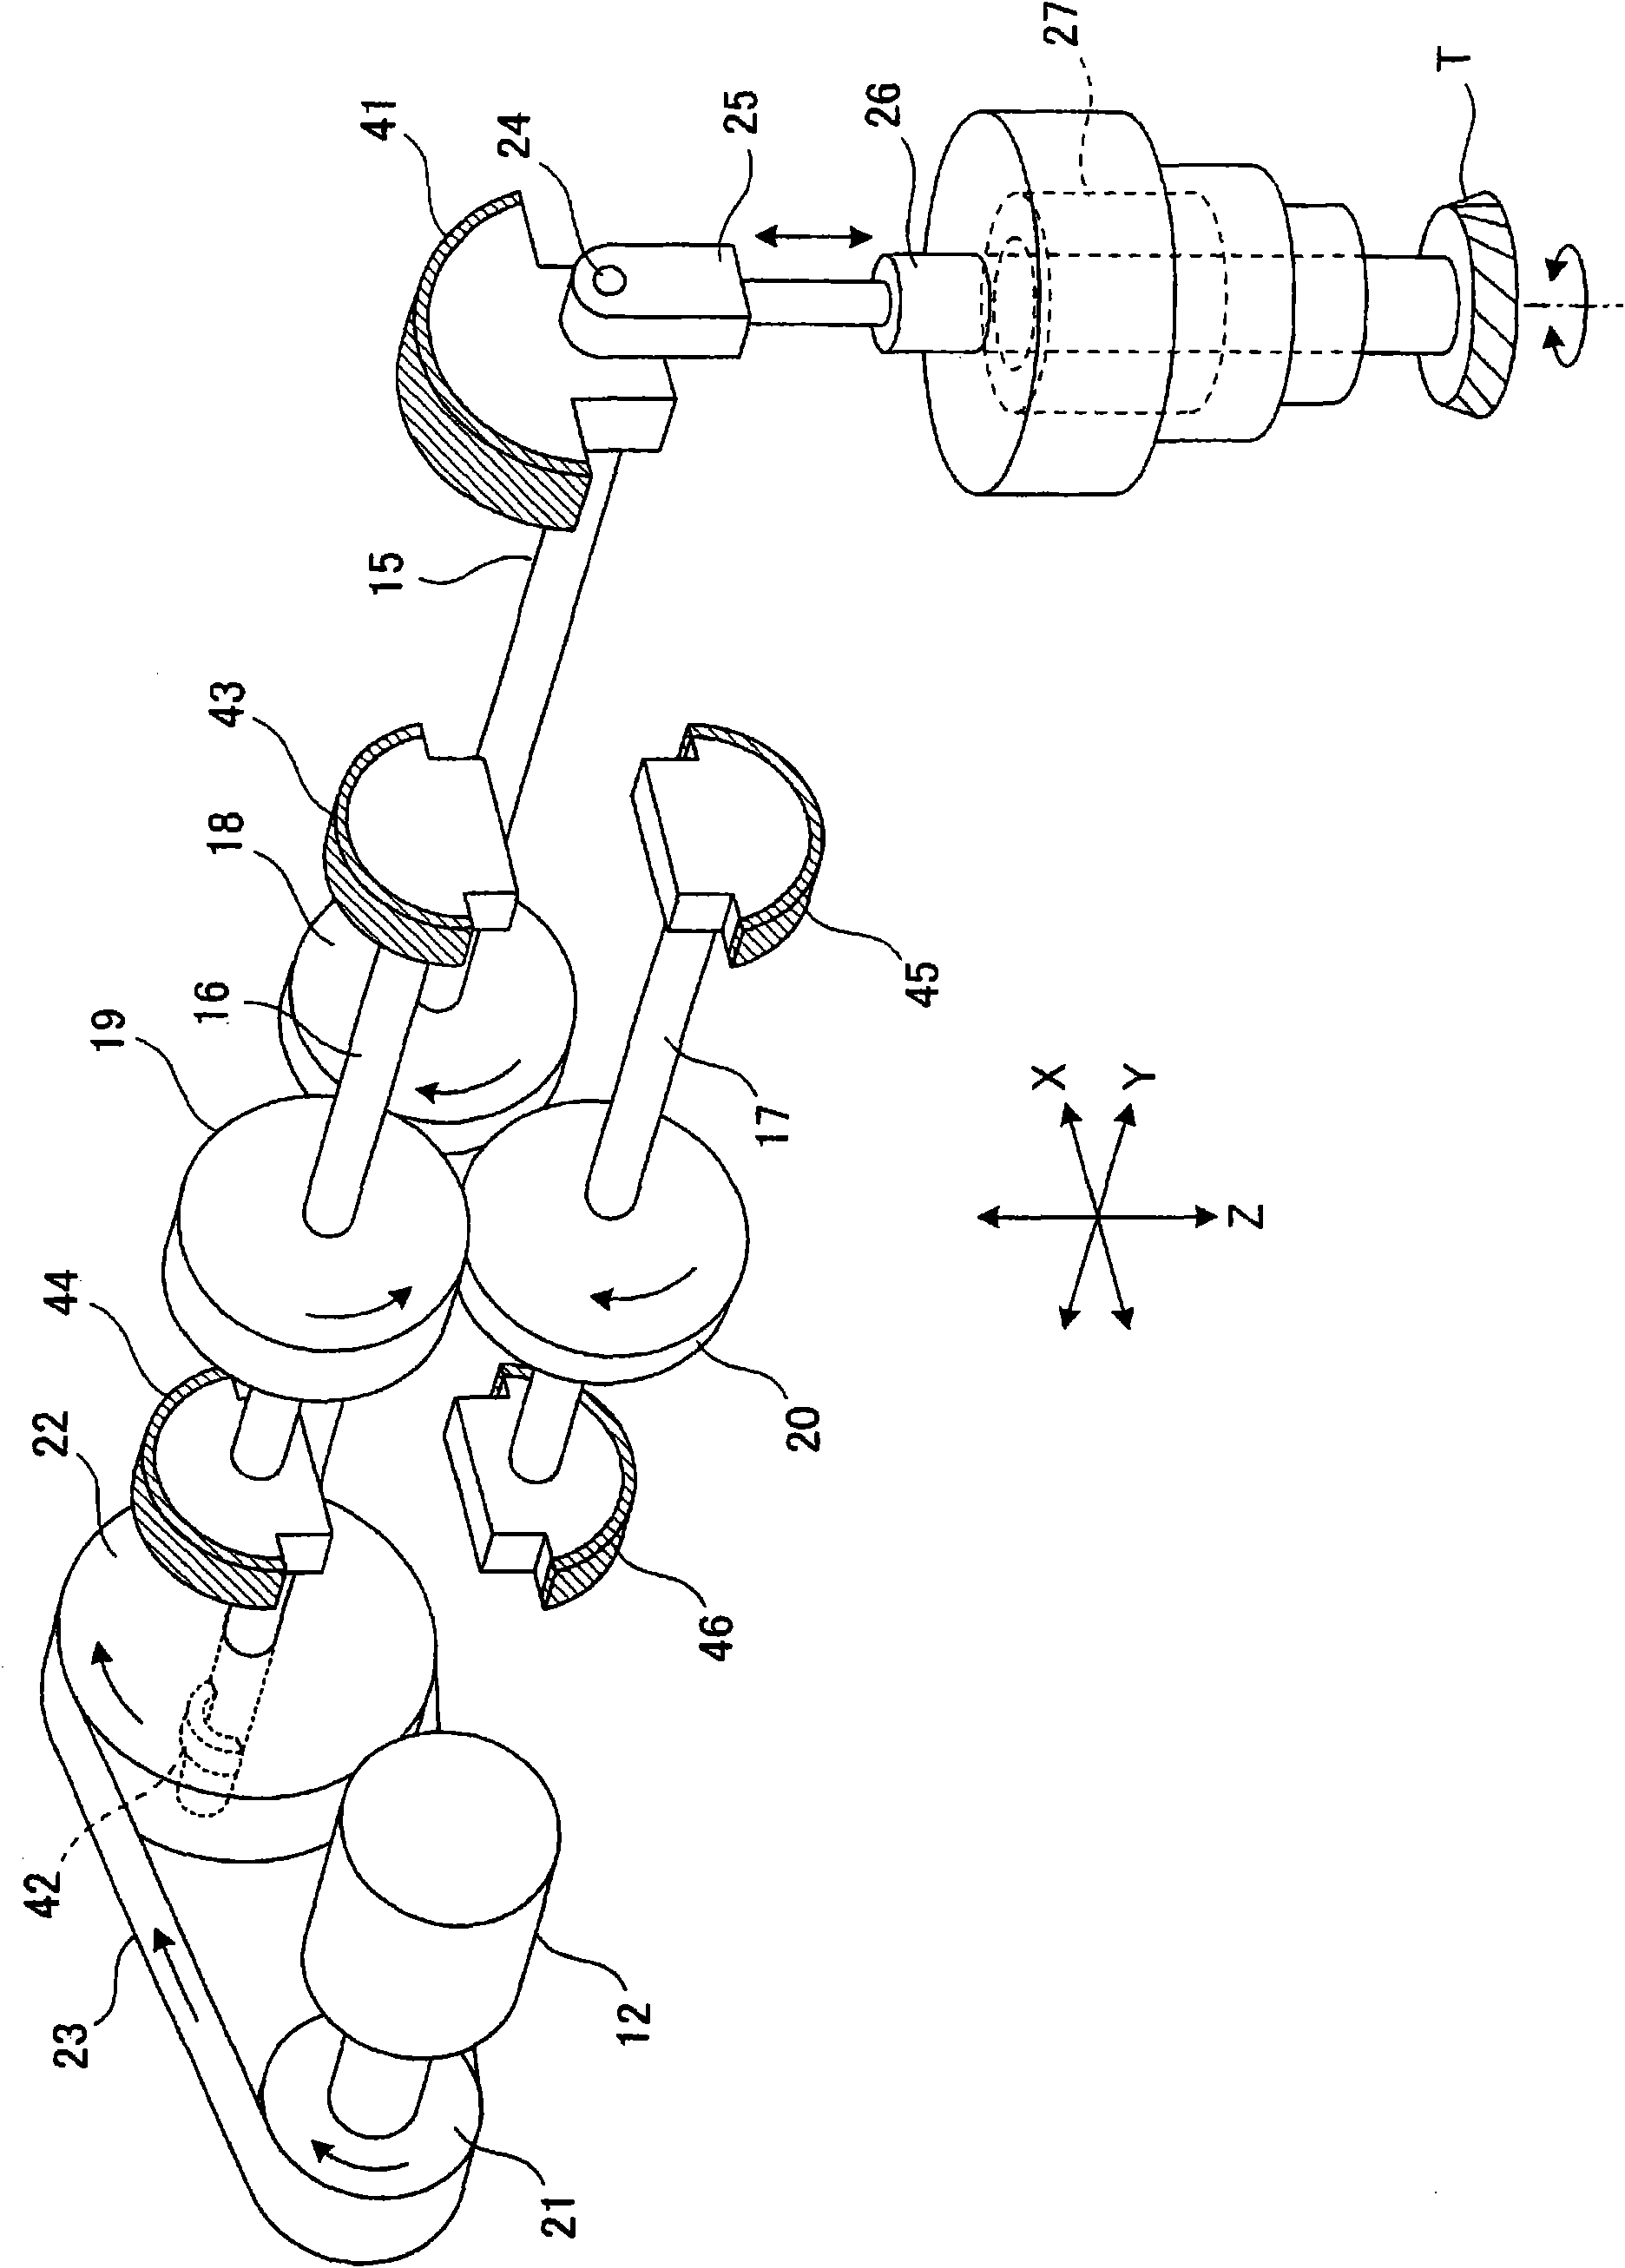 Vibration-suppressing mechanism for gear-shaping machine